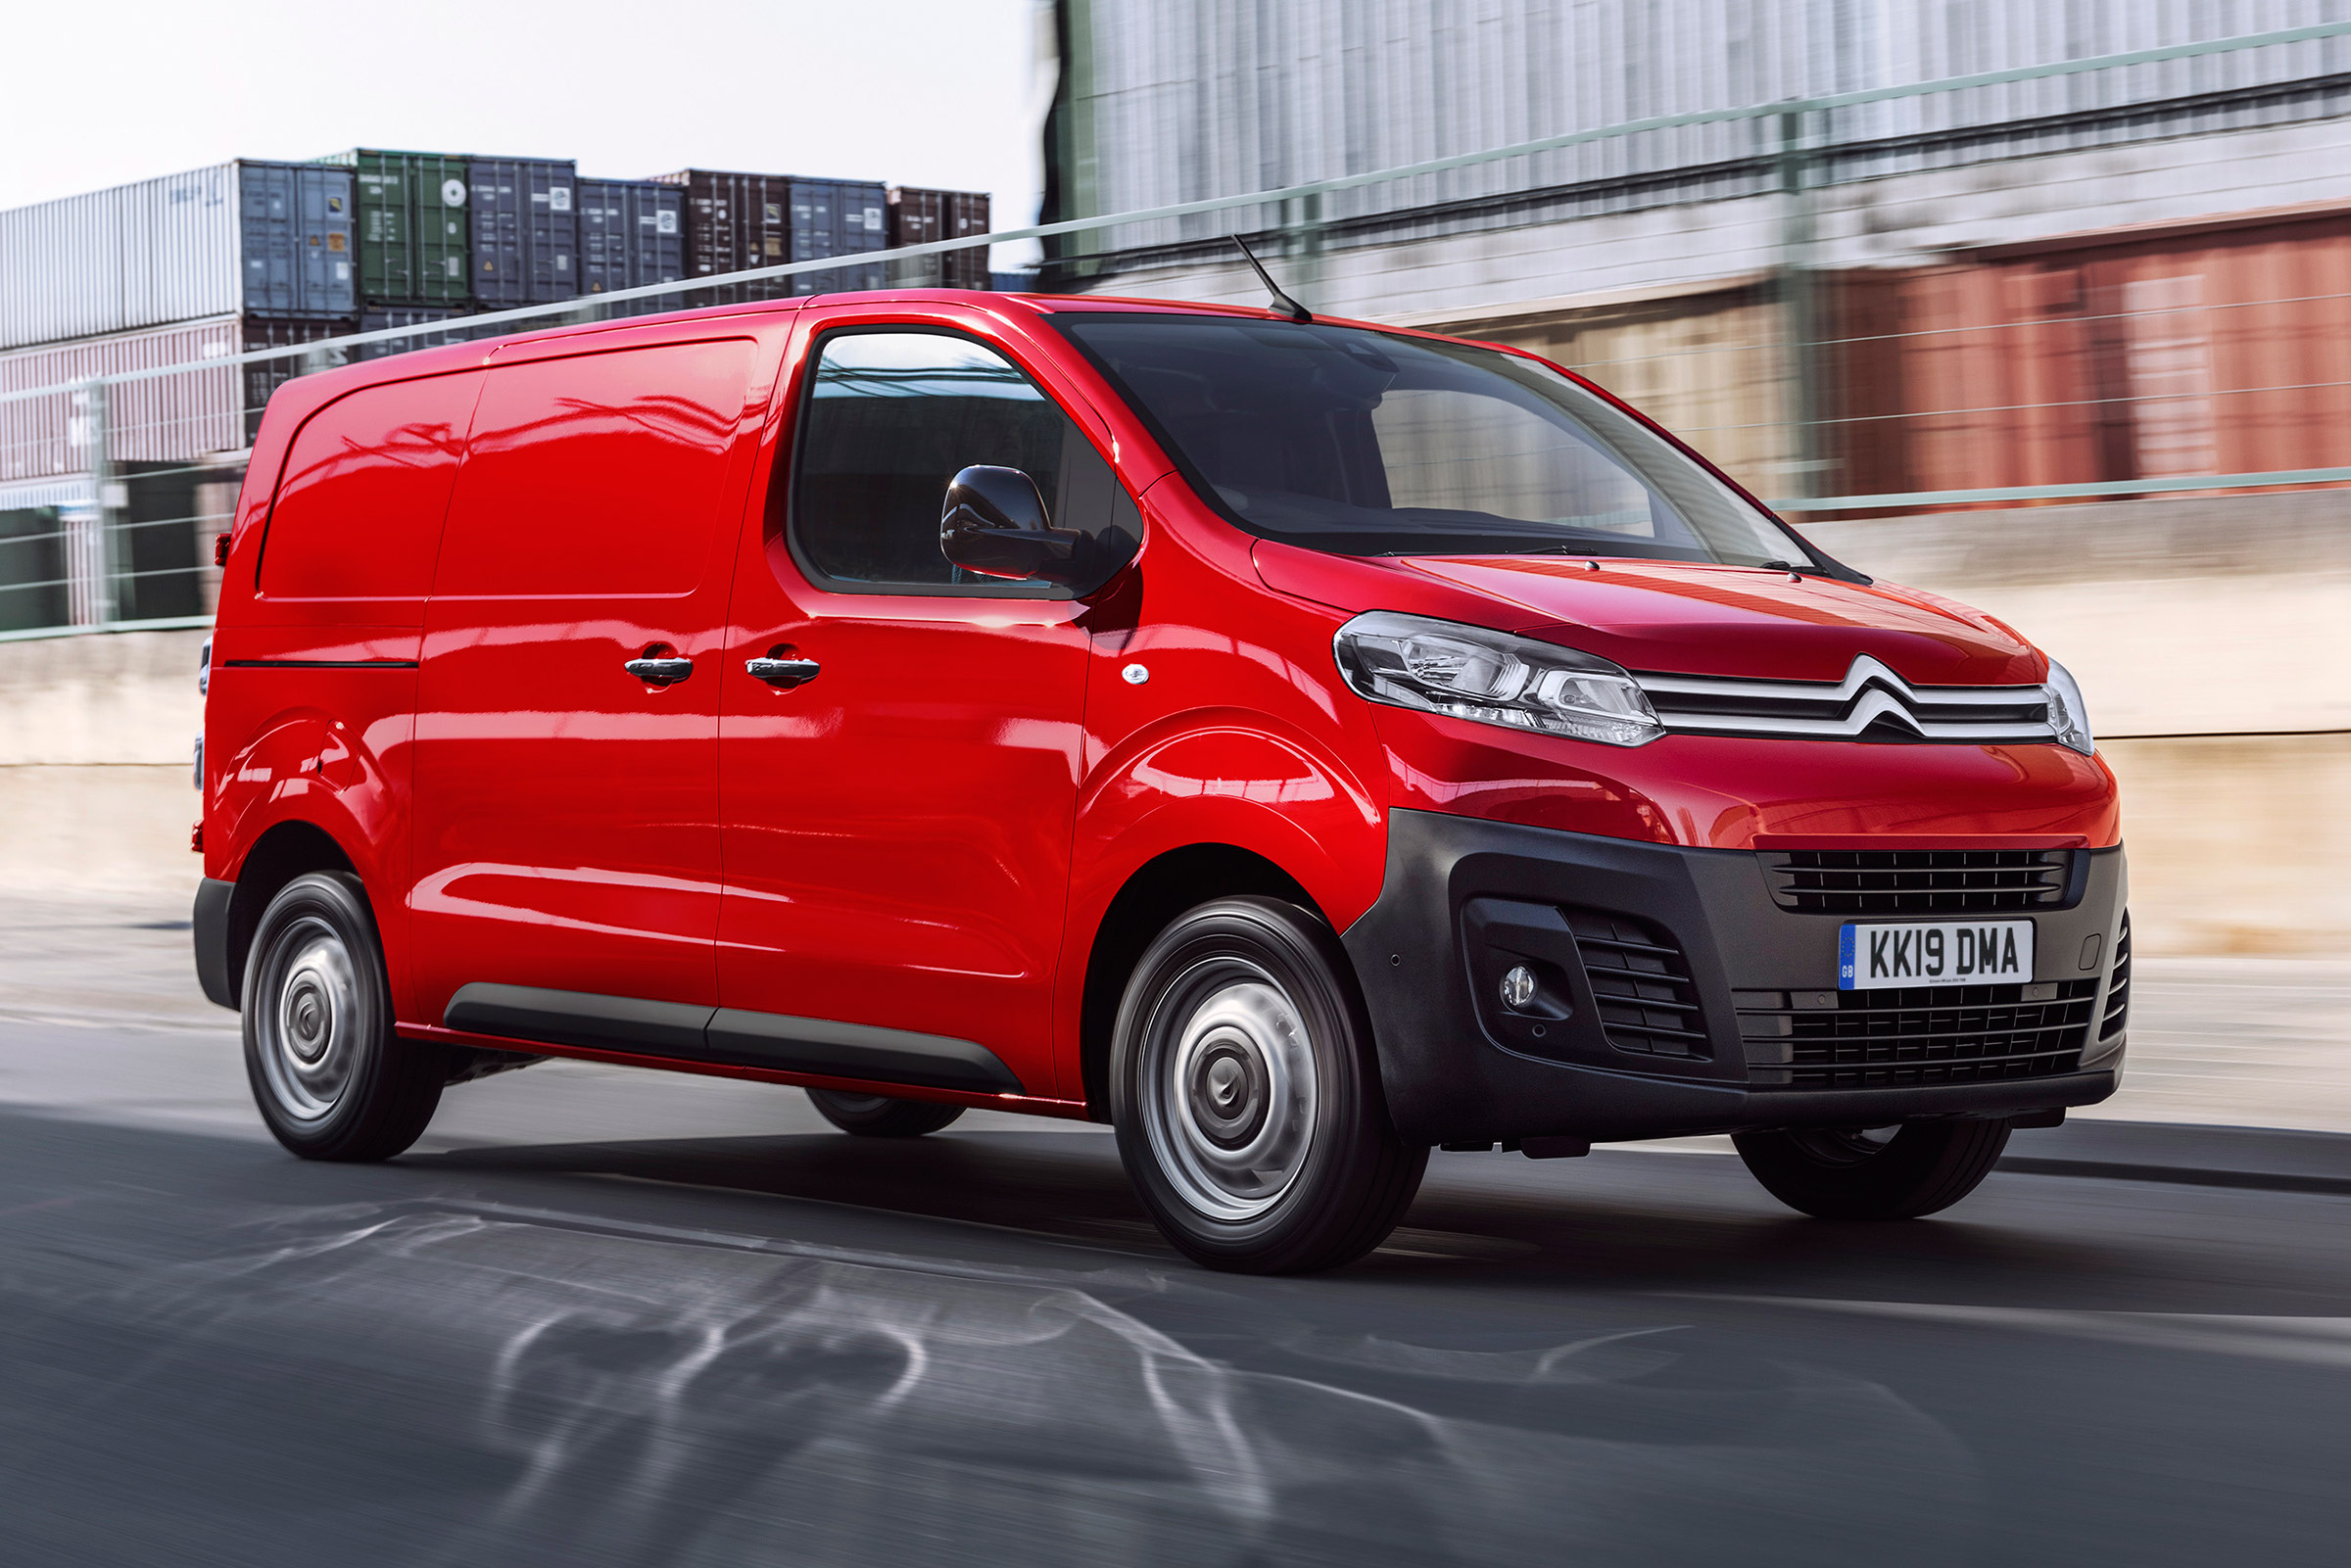 2019 Citroen Dispatch revealed with 